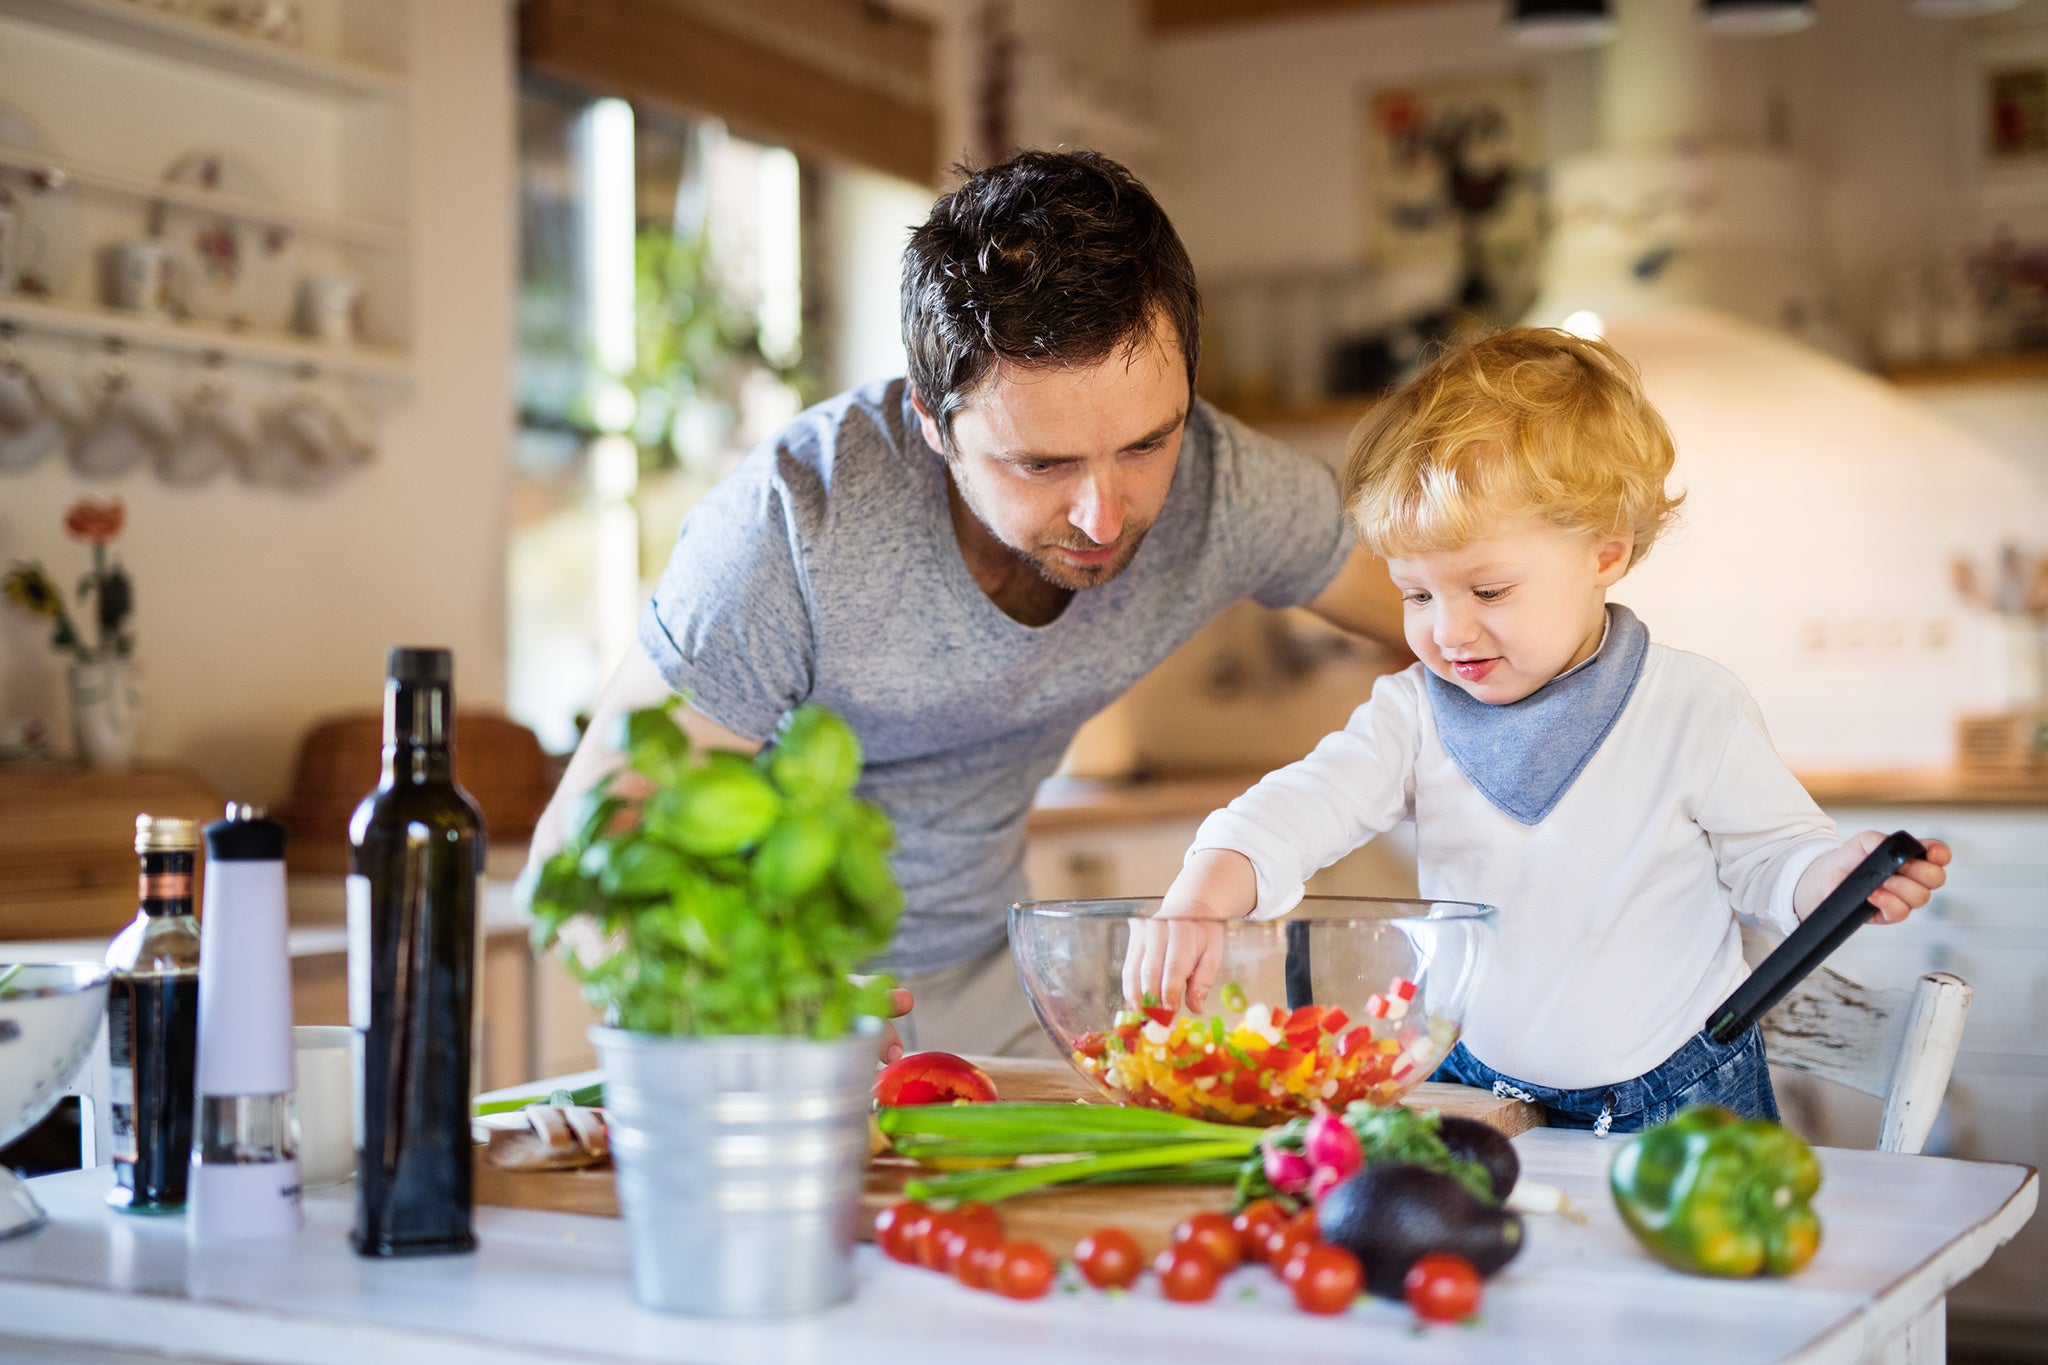 Father with toddler in kitchen cooking. Vegetables salad